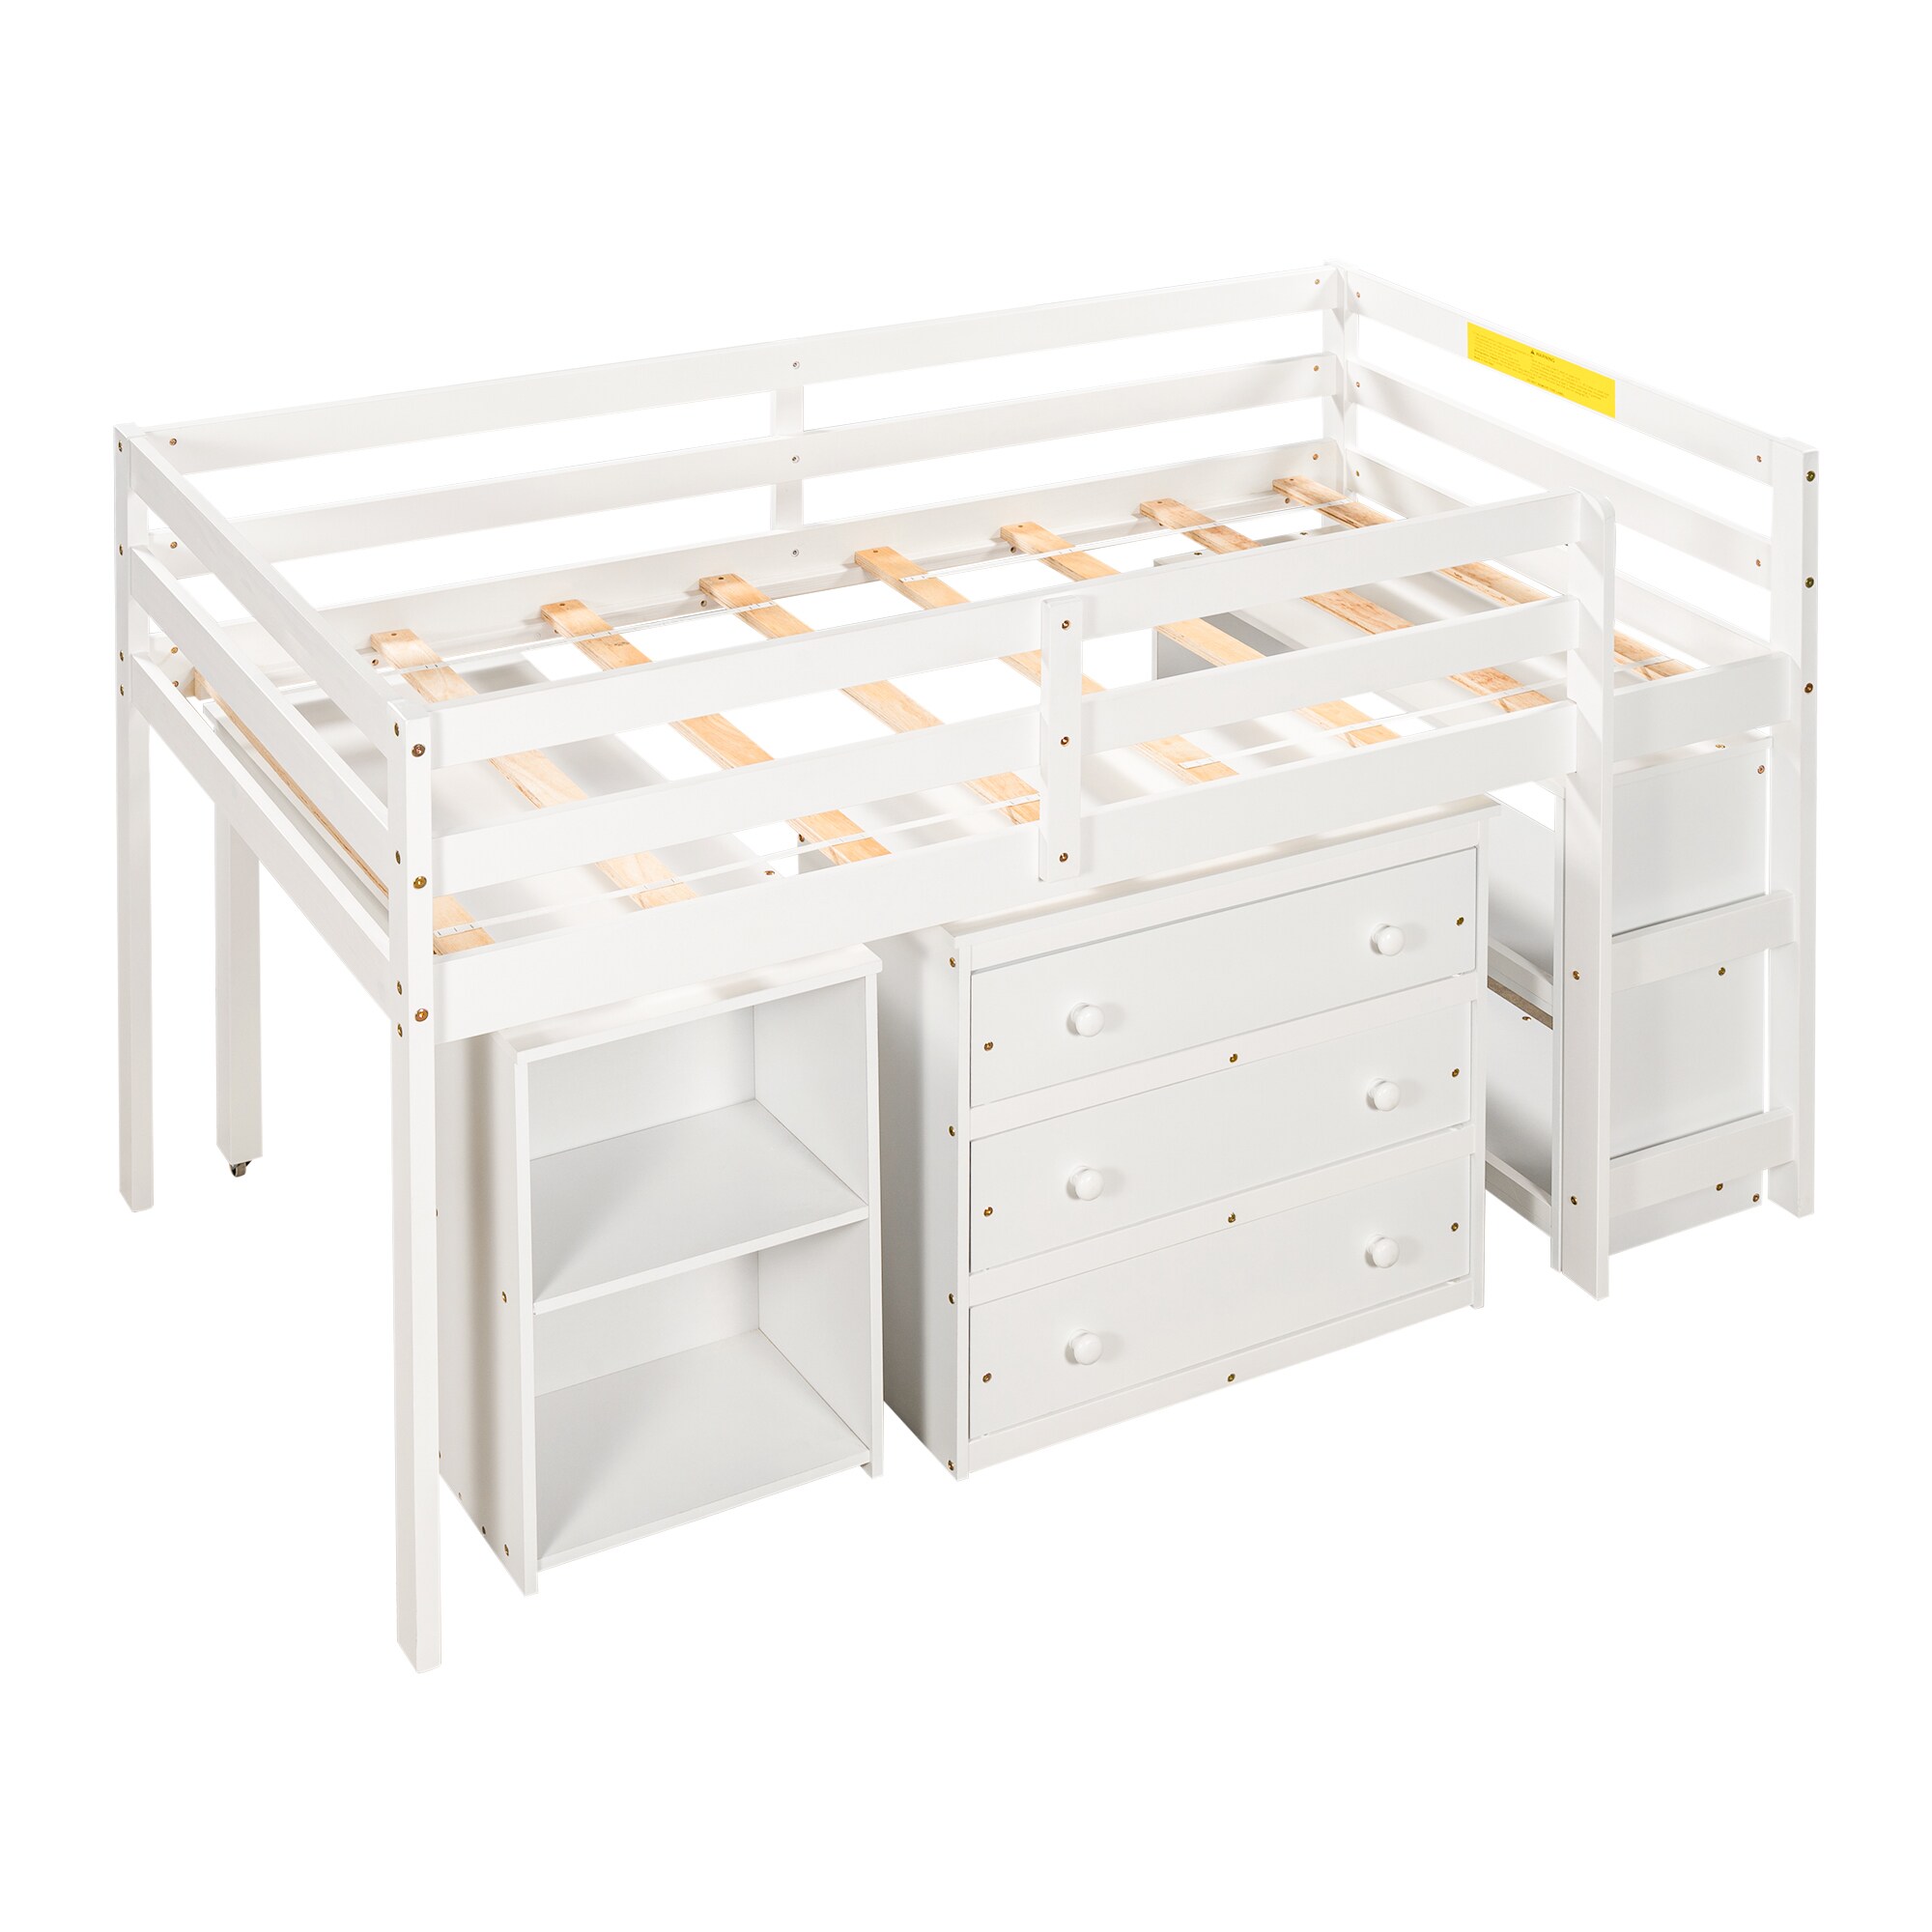 CASAINC House bed White Twin Loft Bunk Bed at Lowes.com